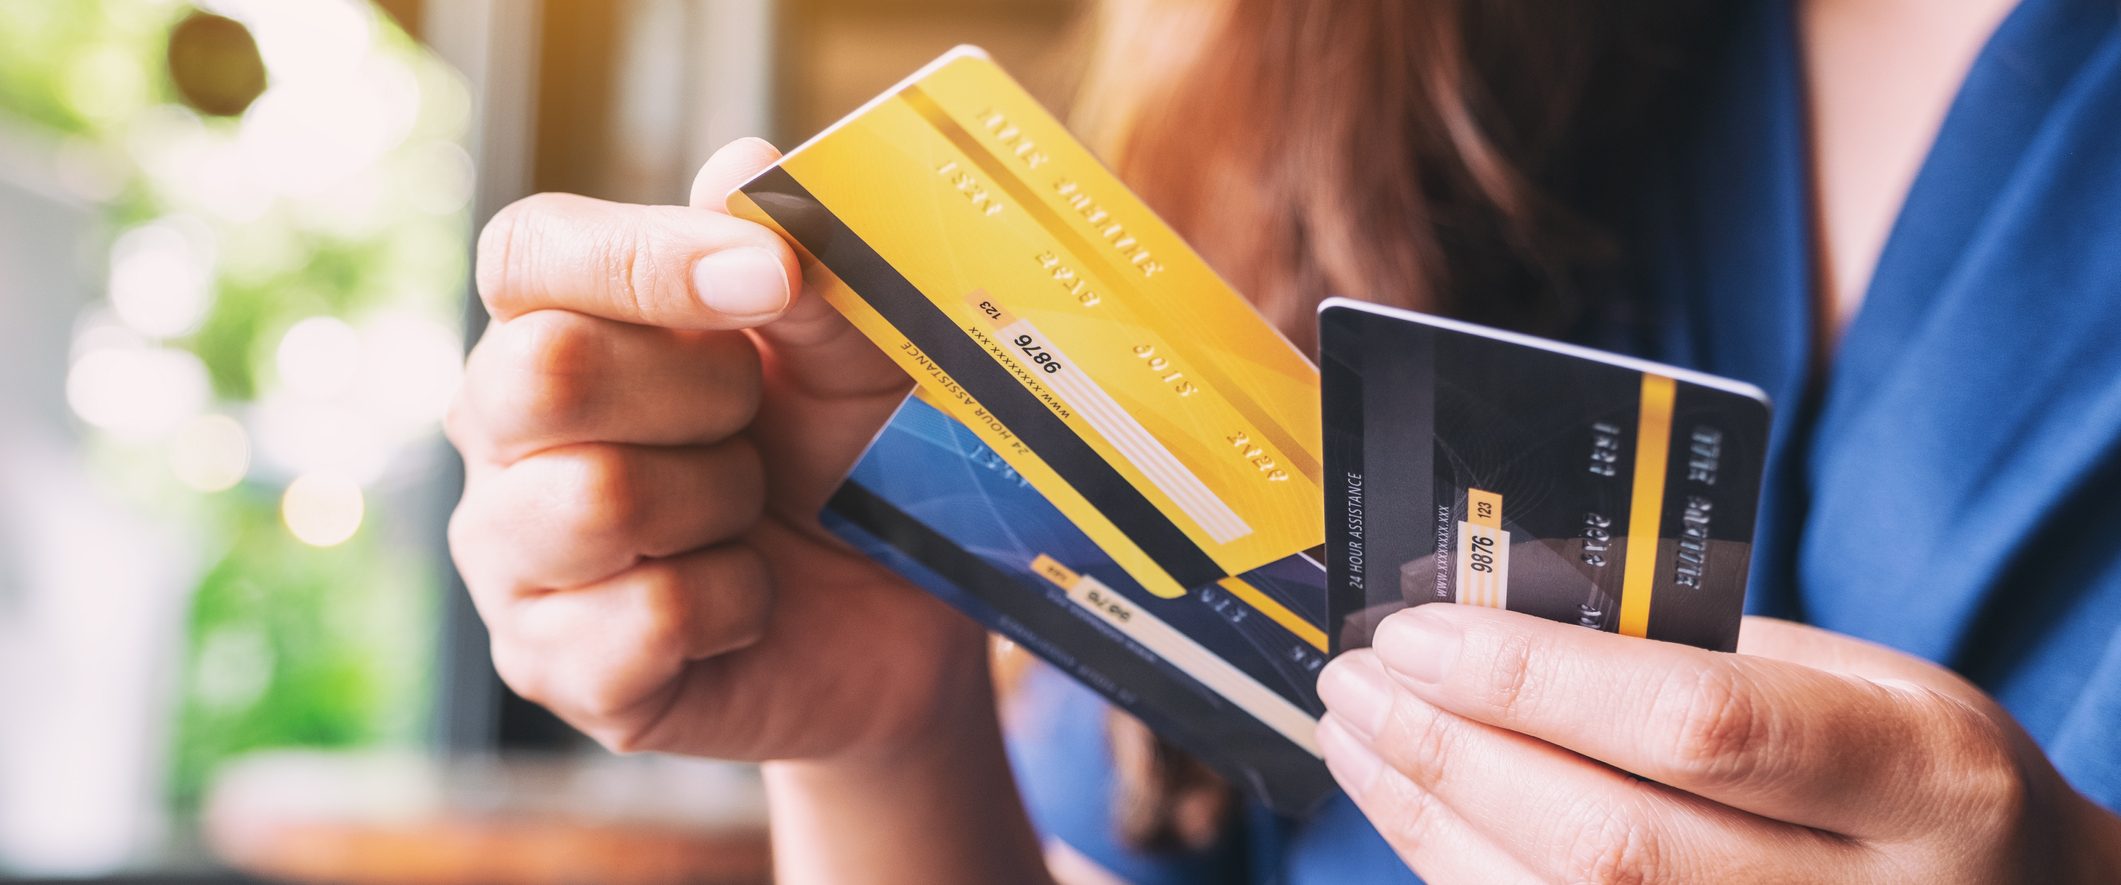 Credit Card vs. Debit Card in Canada: Differences Explained - NerdWallet